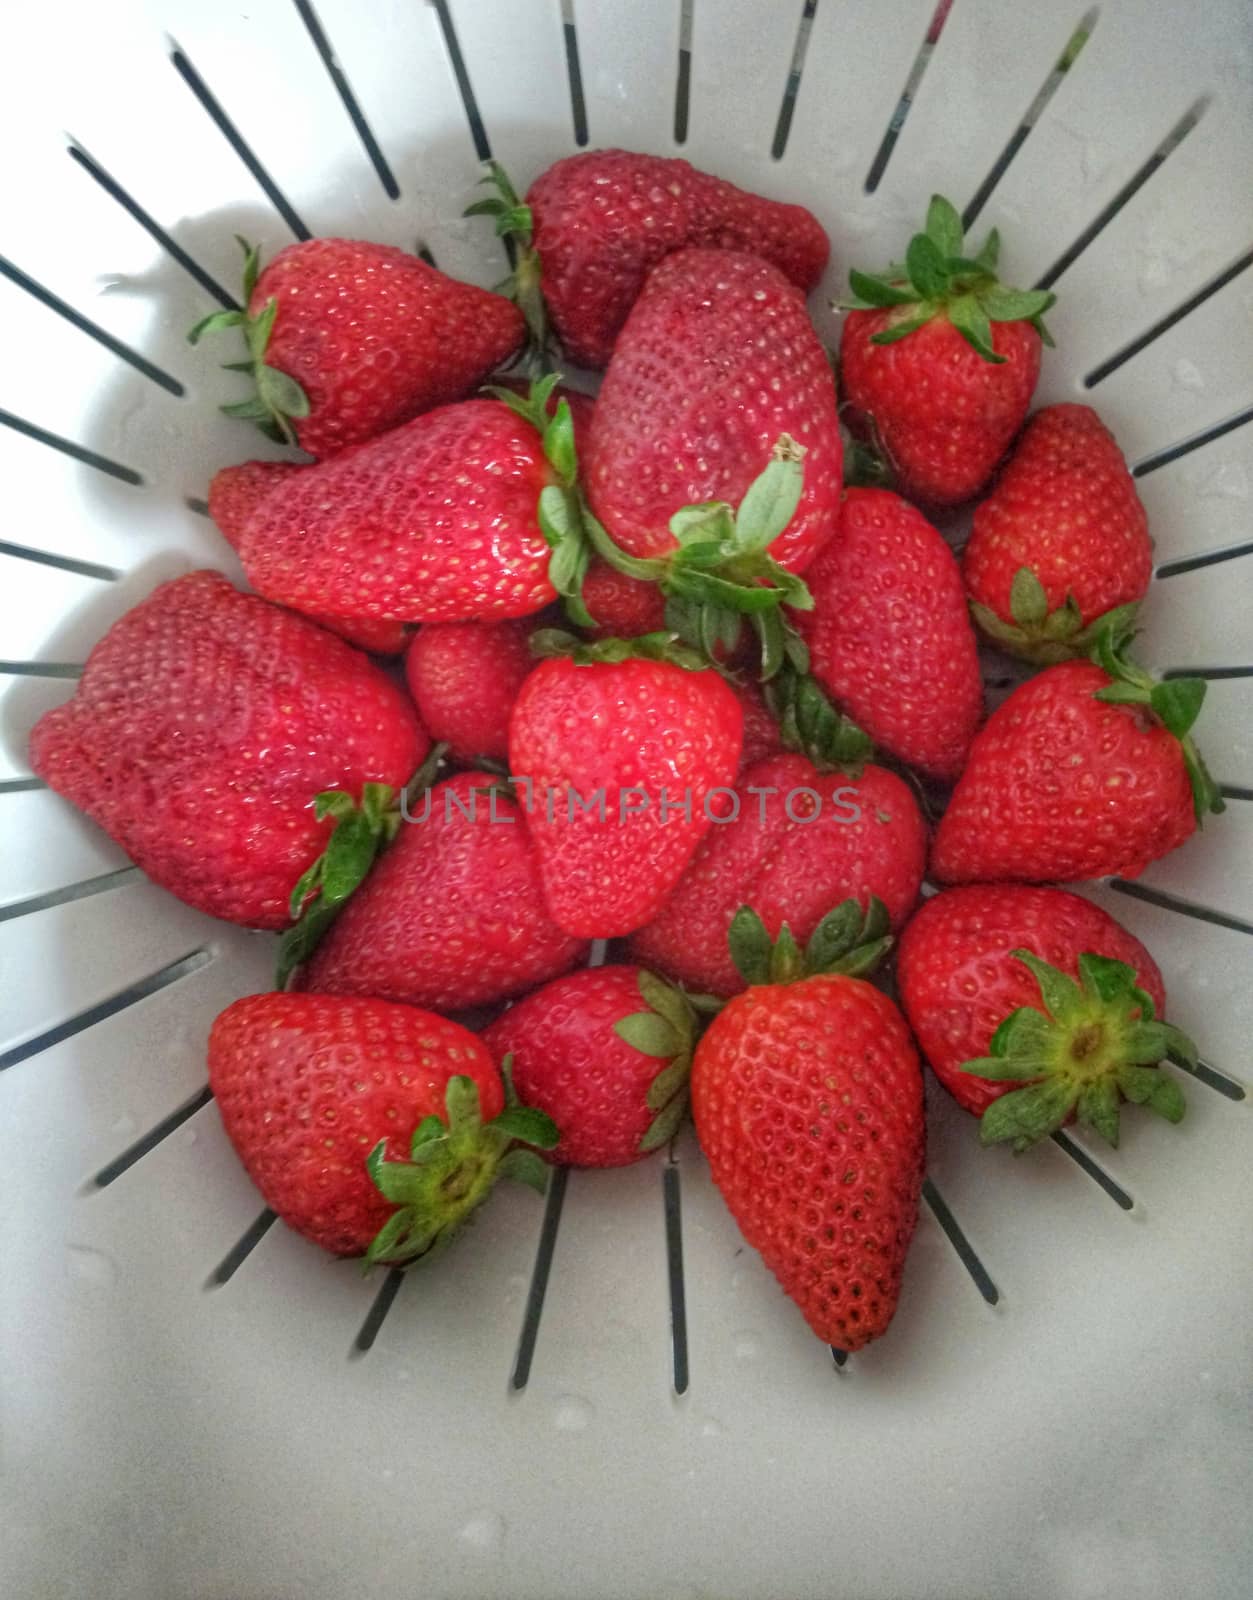 A moltitude of strawberries ready to be washed under the water.